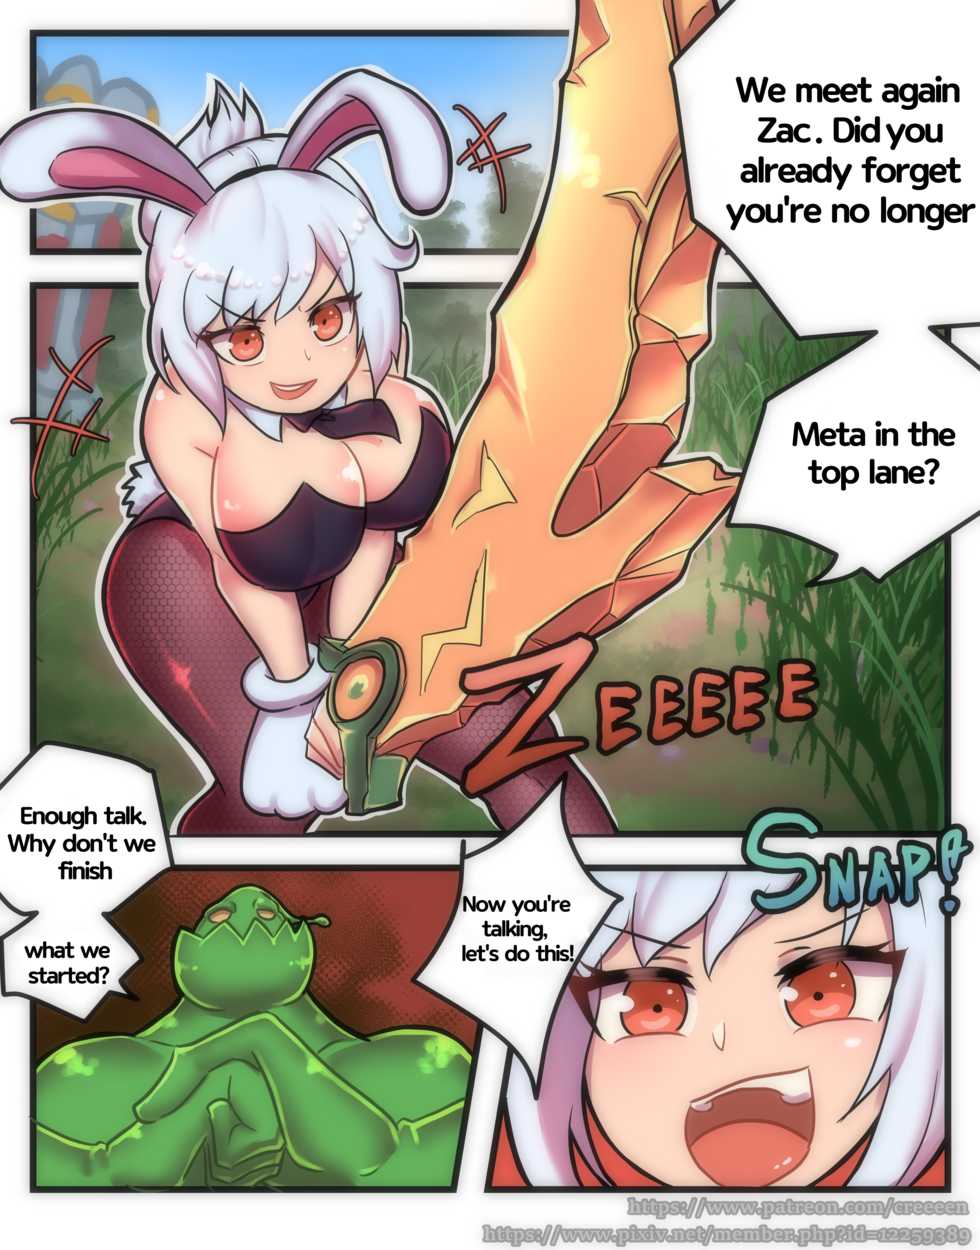 [Creeeen] Rabbit Jelly (League of Legends) [English] - Page 2